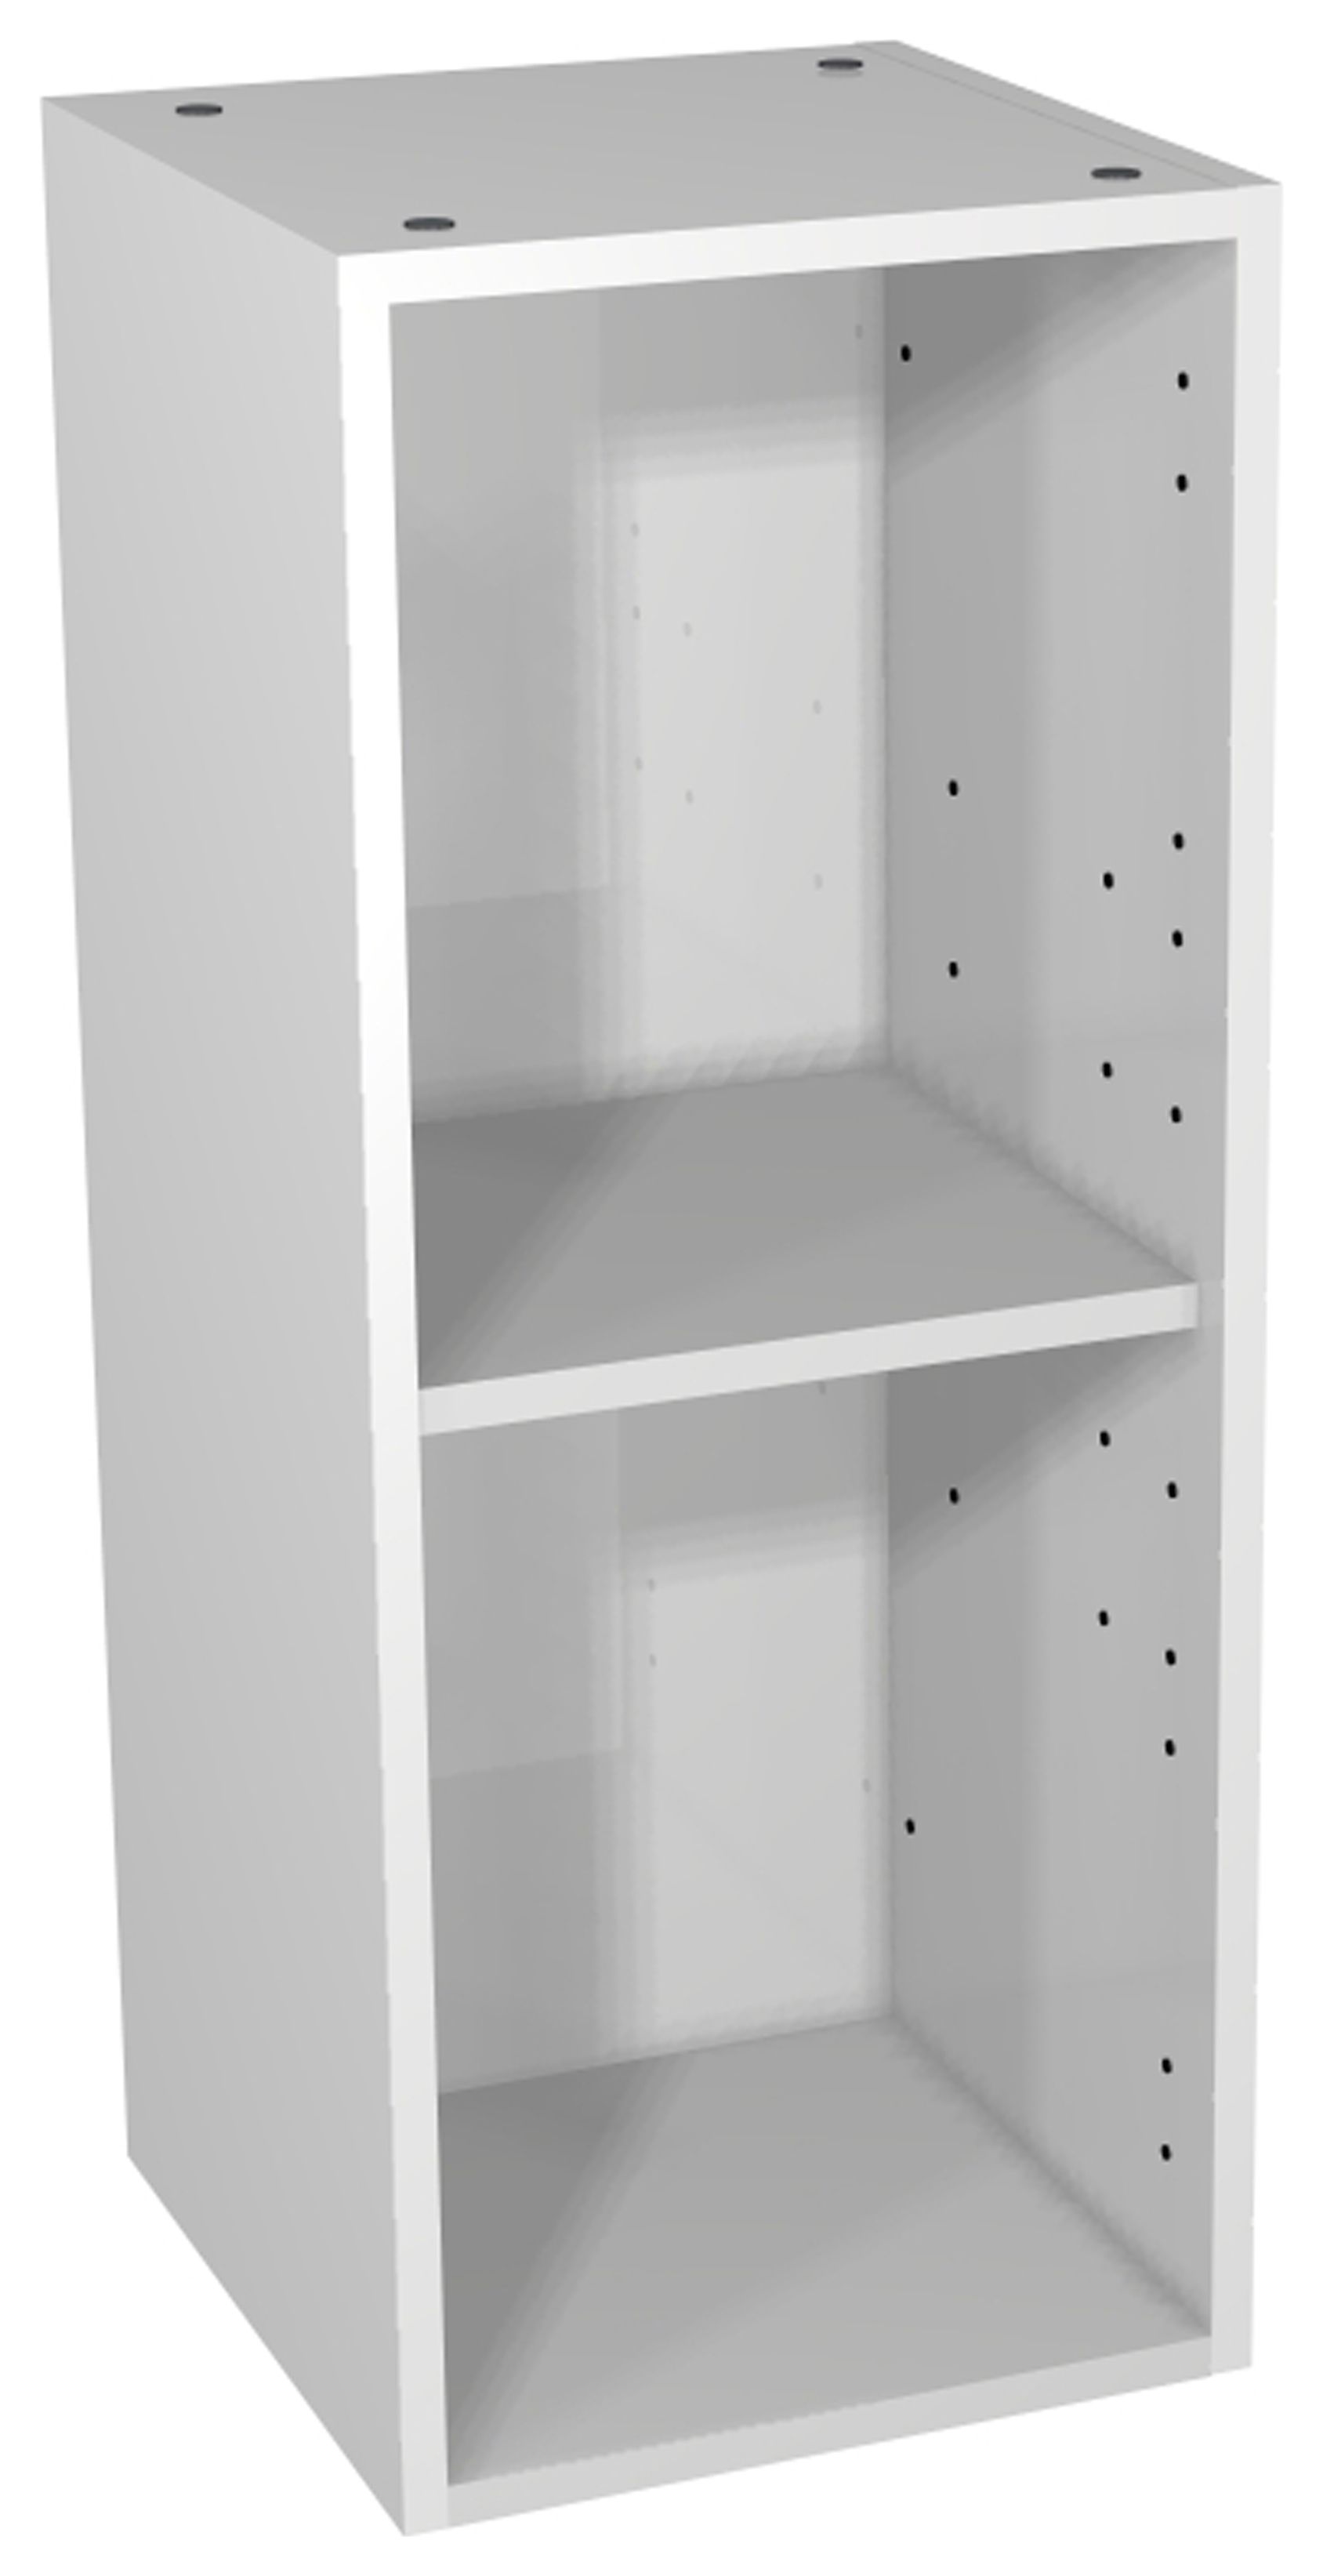 Image of Wickes Hertford Gloss Grey Open Display Unit - 300 x 735mm